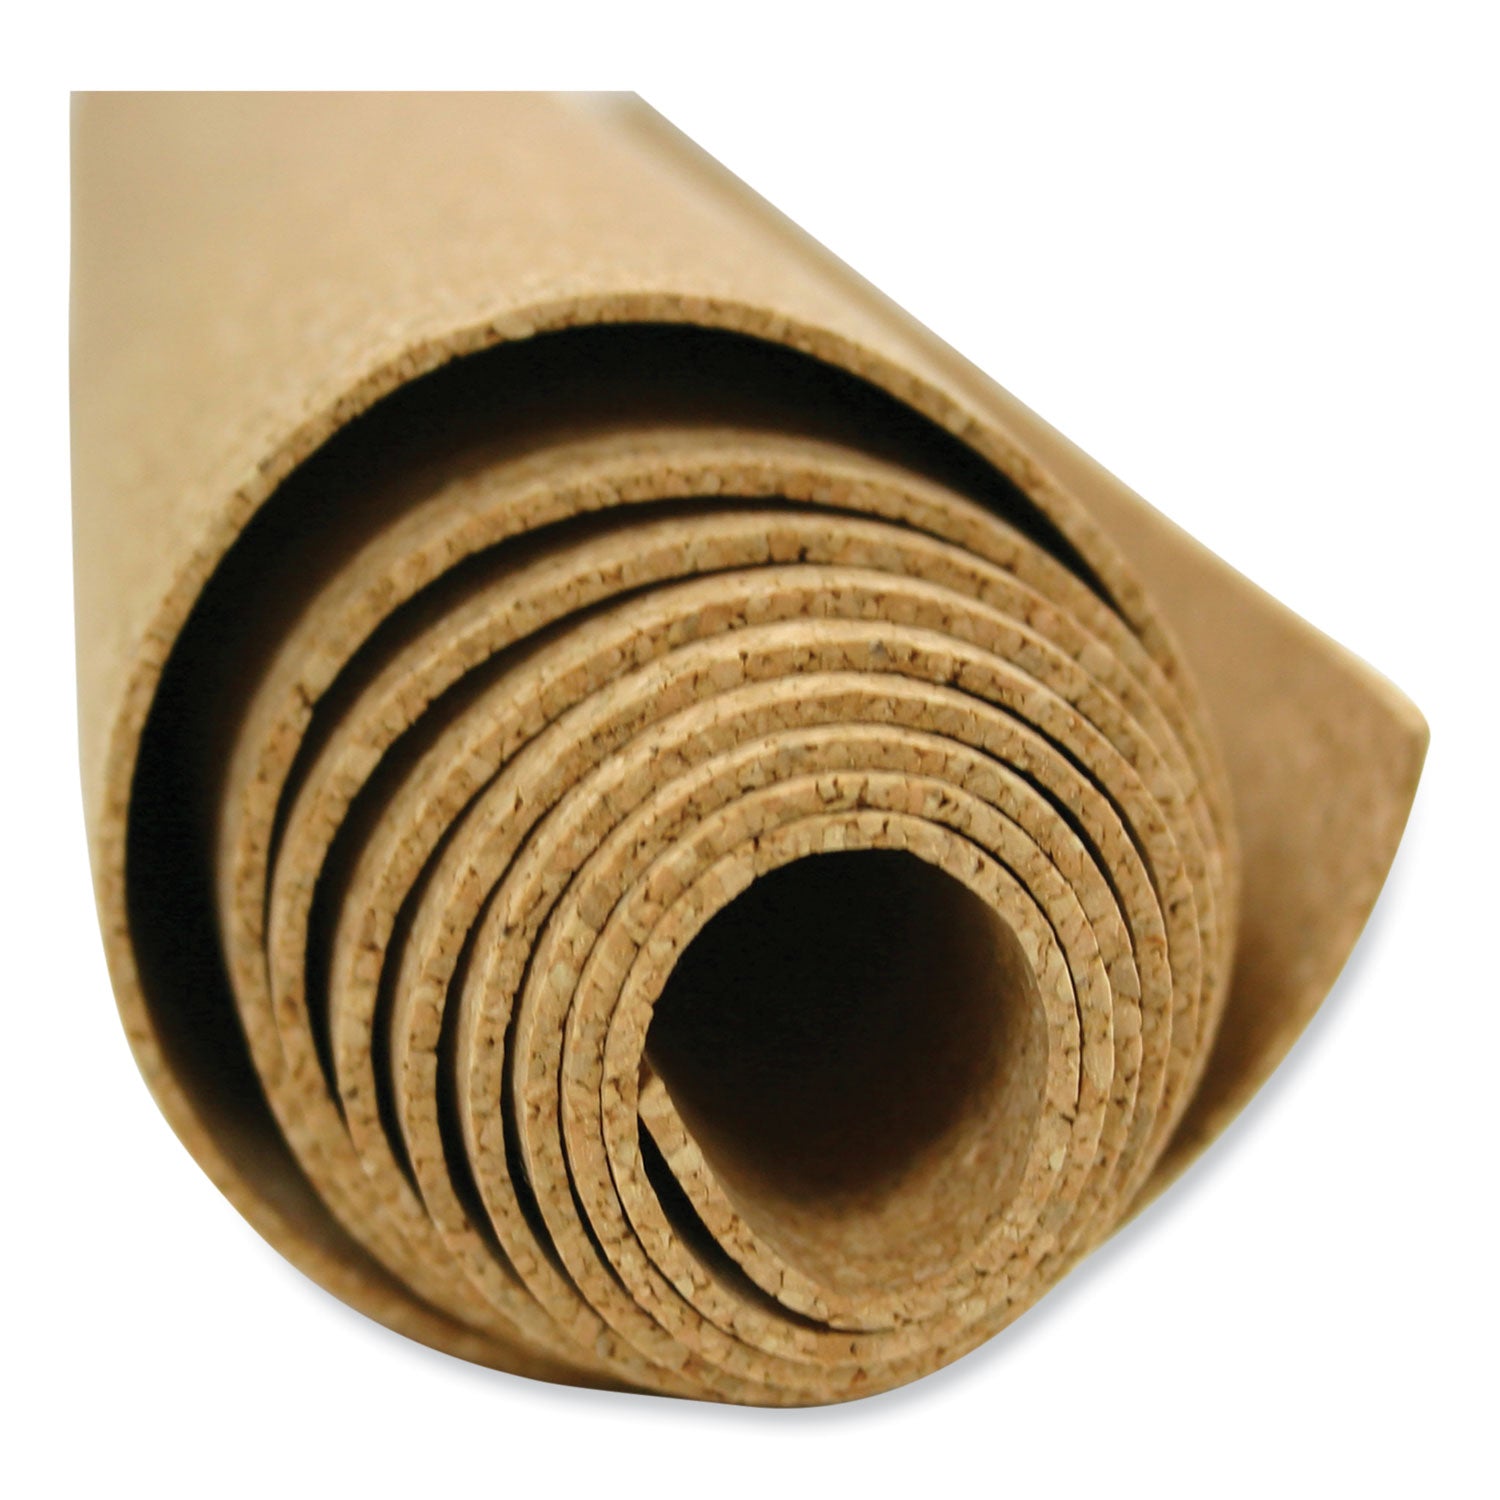 1-4-natural-cork-roll-96-x-48-tan-surface-ships-in-7-10-business-days_ghe14rk48 - 1